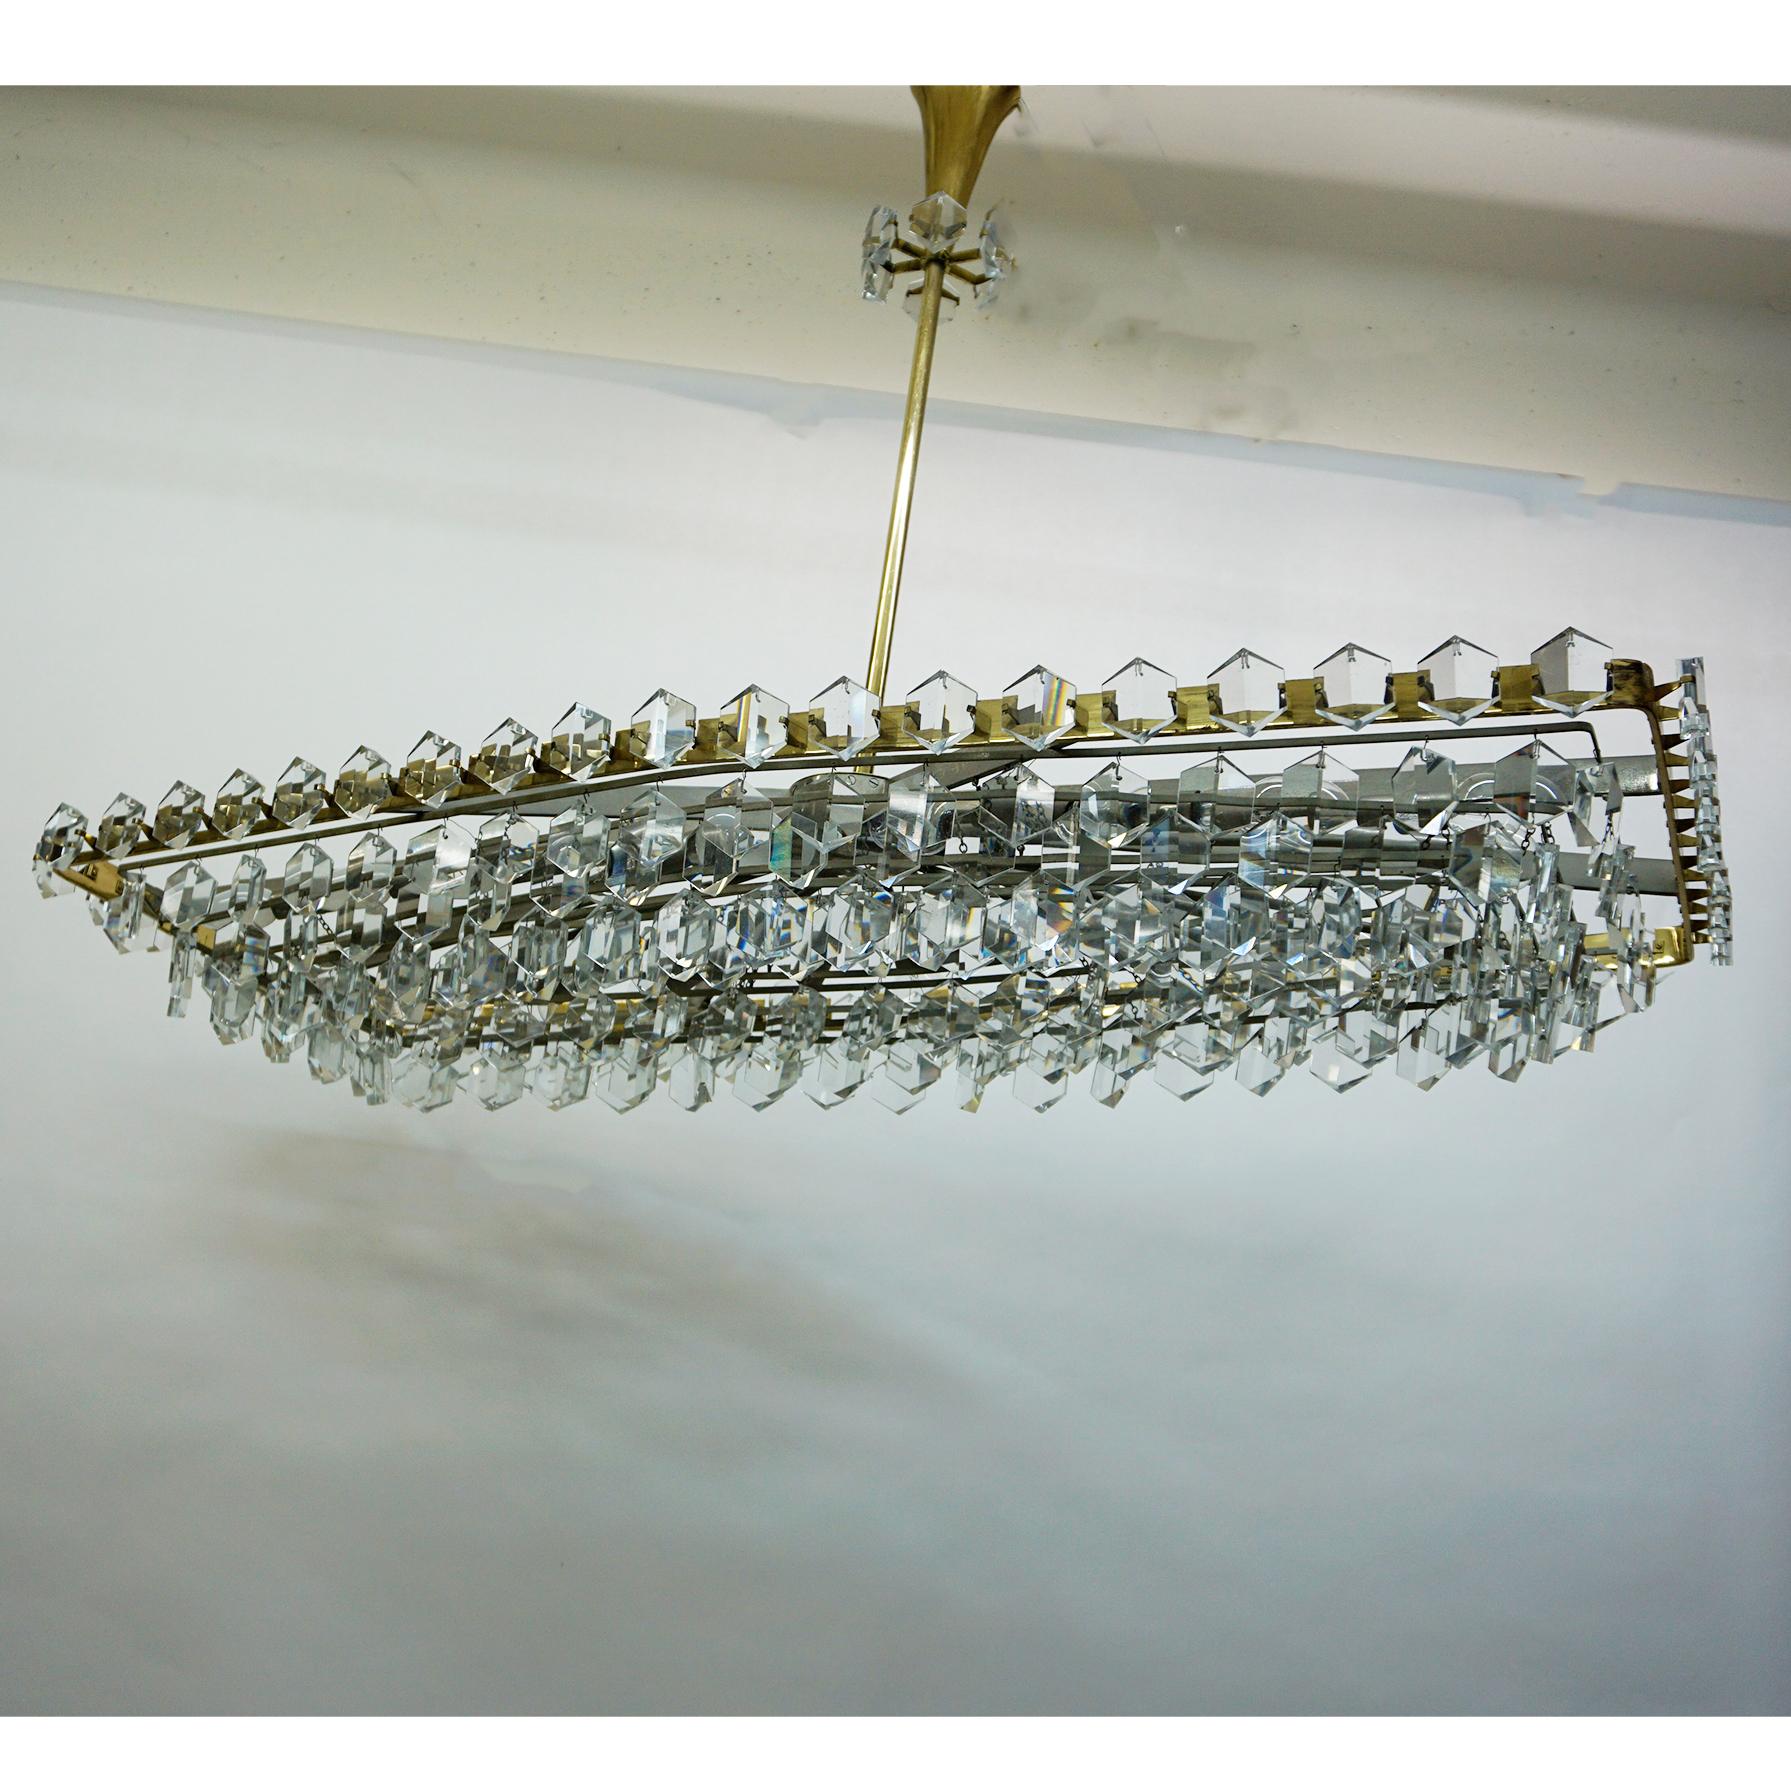 Fantastic and huge square Austrian Mid-Century Modern sparkling handcut crystal glass and brass chandelier designed by Oswald Haerdtl for J. & L. Lobmeyr in the 1950s. It is a variation of the circular Chandelier designed by Haerdtl for the